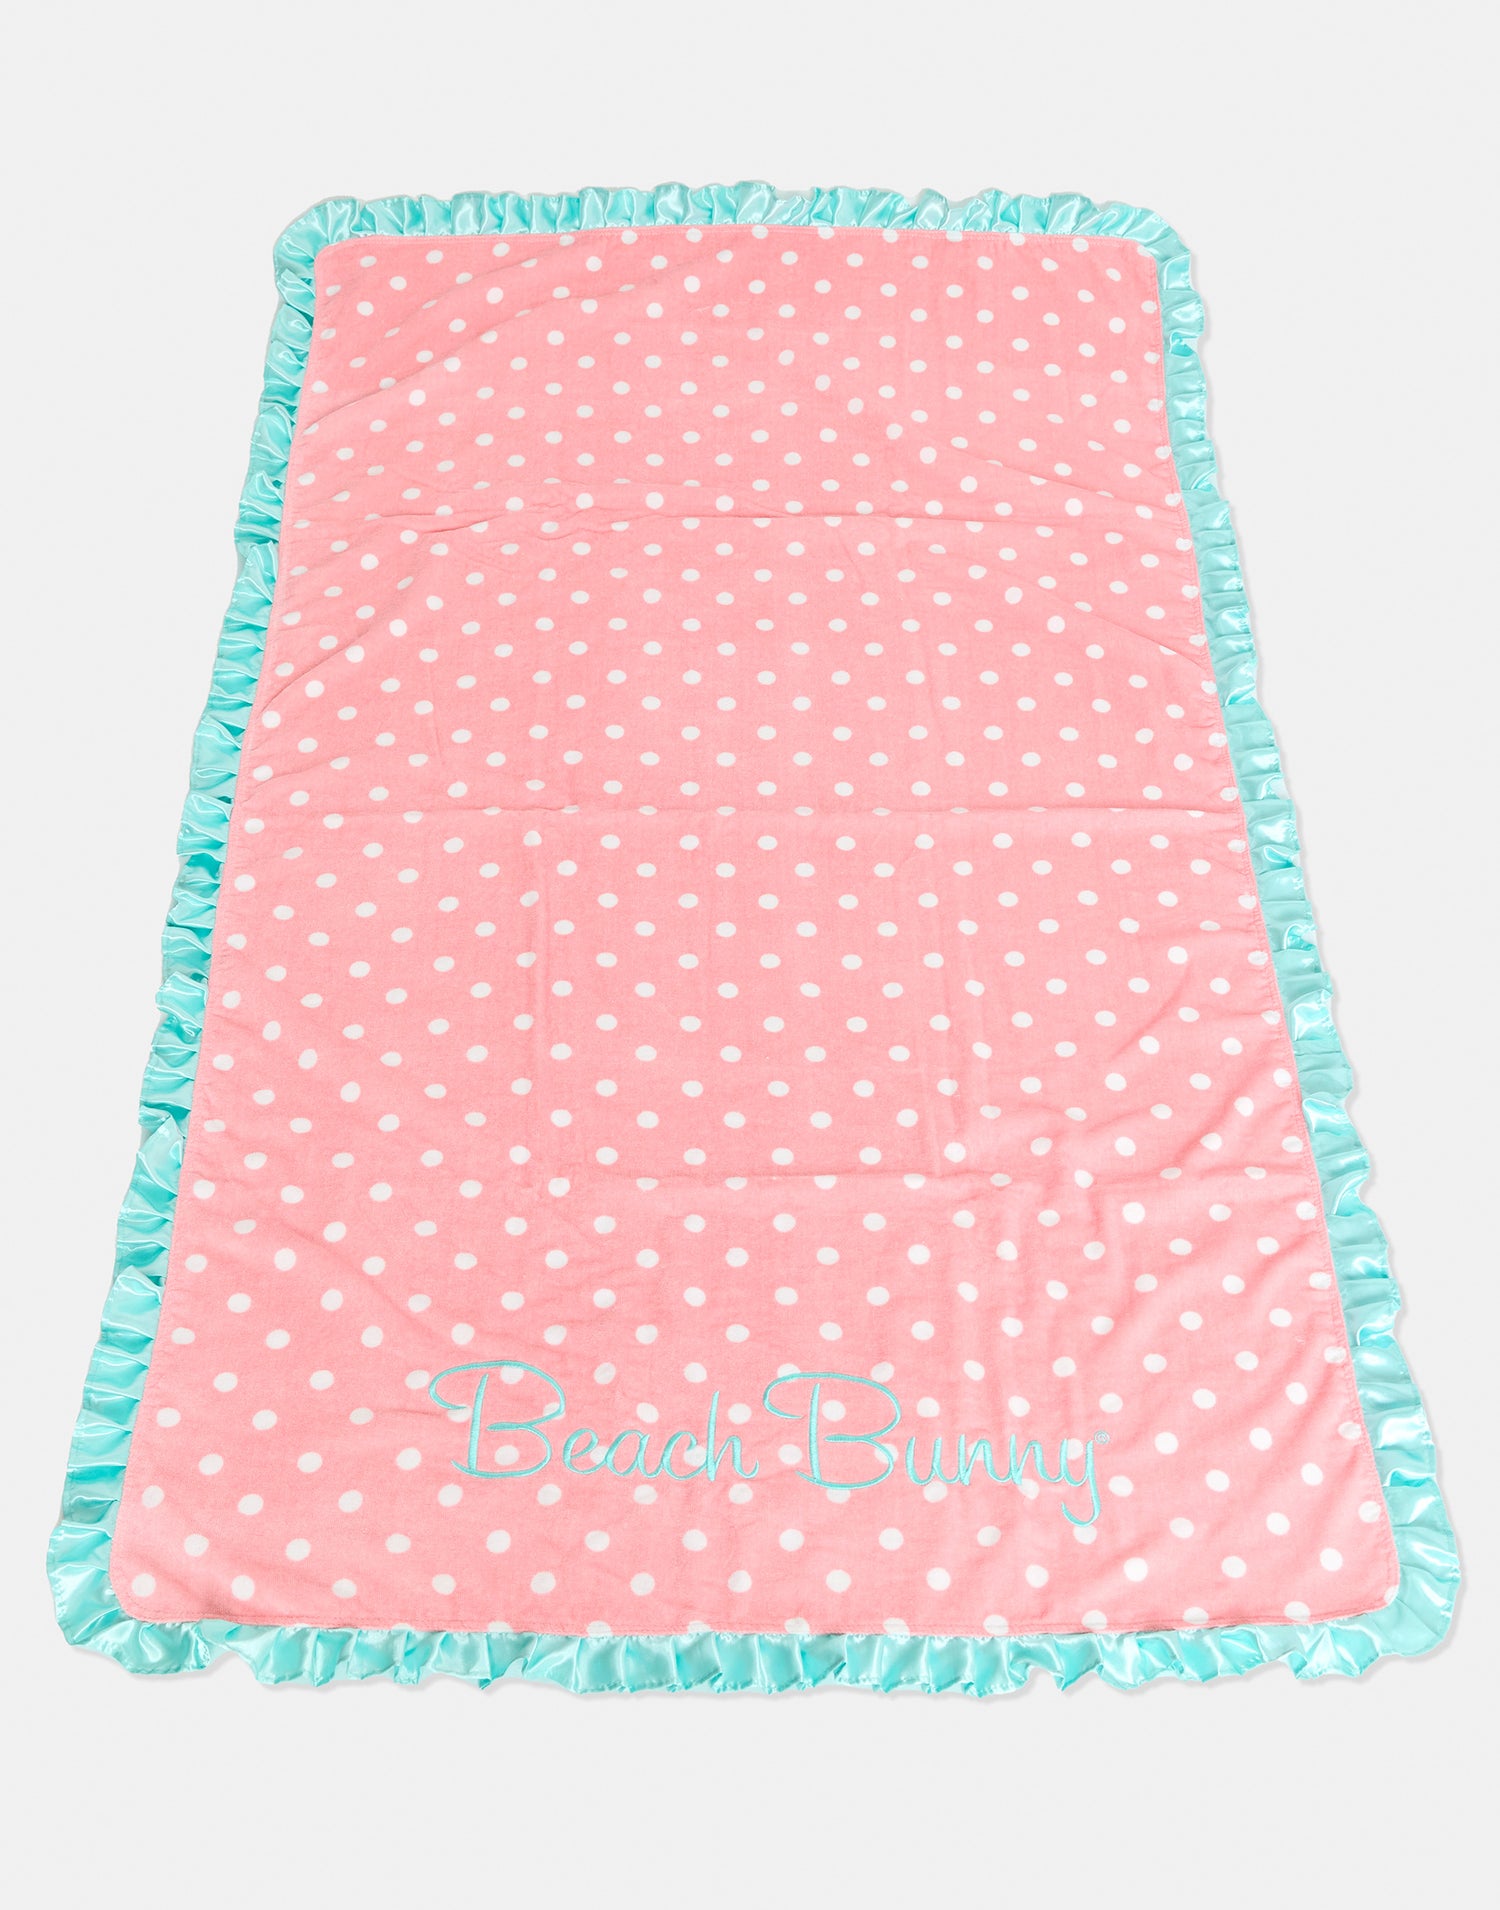 Beach Bunny Towel in Summer Dot with Teal Ruffle - Front View